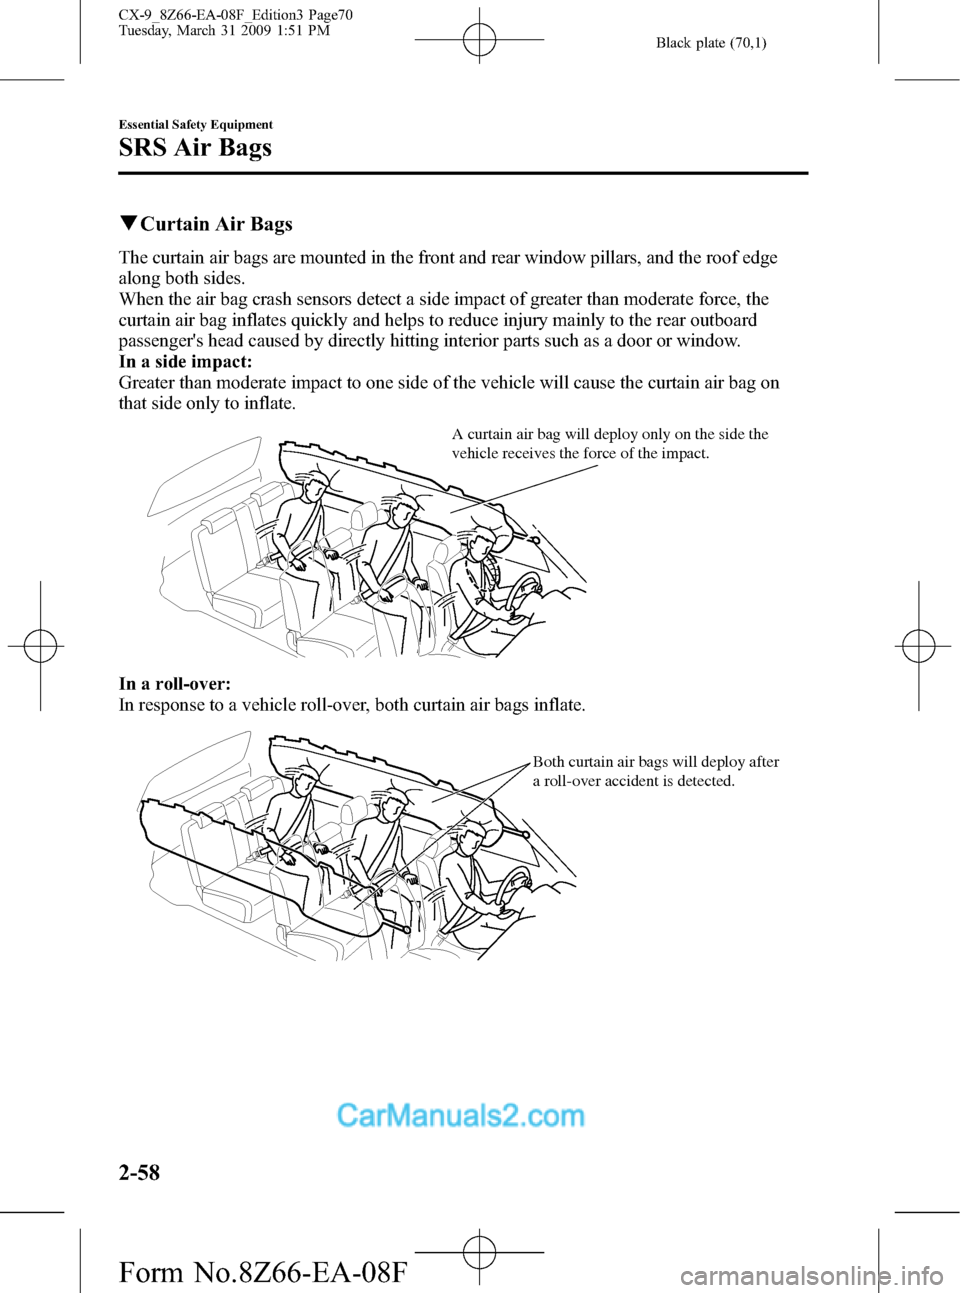 MAZDA MODEL CX-9 2009  Owners Manual (in English) Black plate (70,1)
qCurtain Air Bags
The curtain air bags are mounted in the front and rear window pillars, and the roof edge
along both sides.
When the air bag crash sensors detect a side impact of g